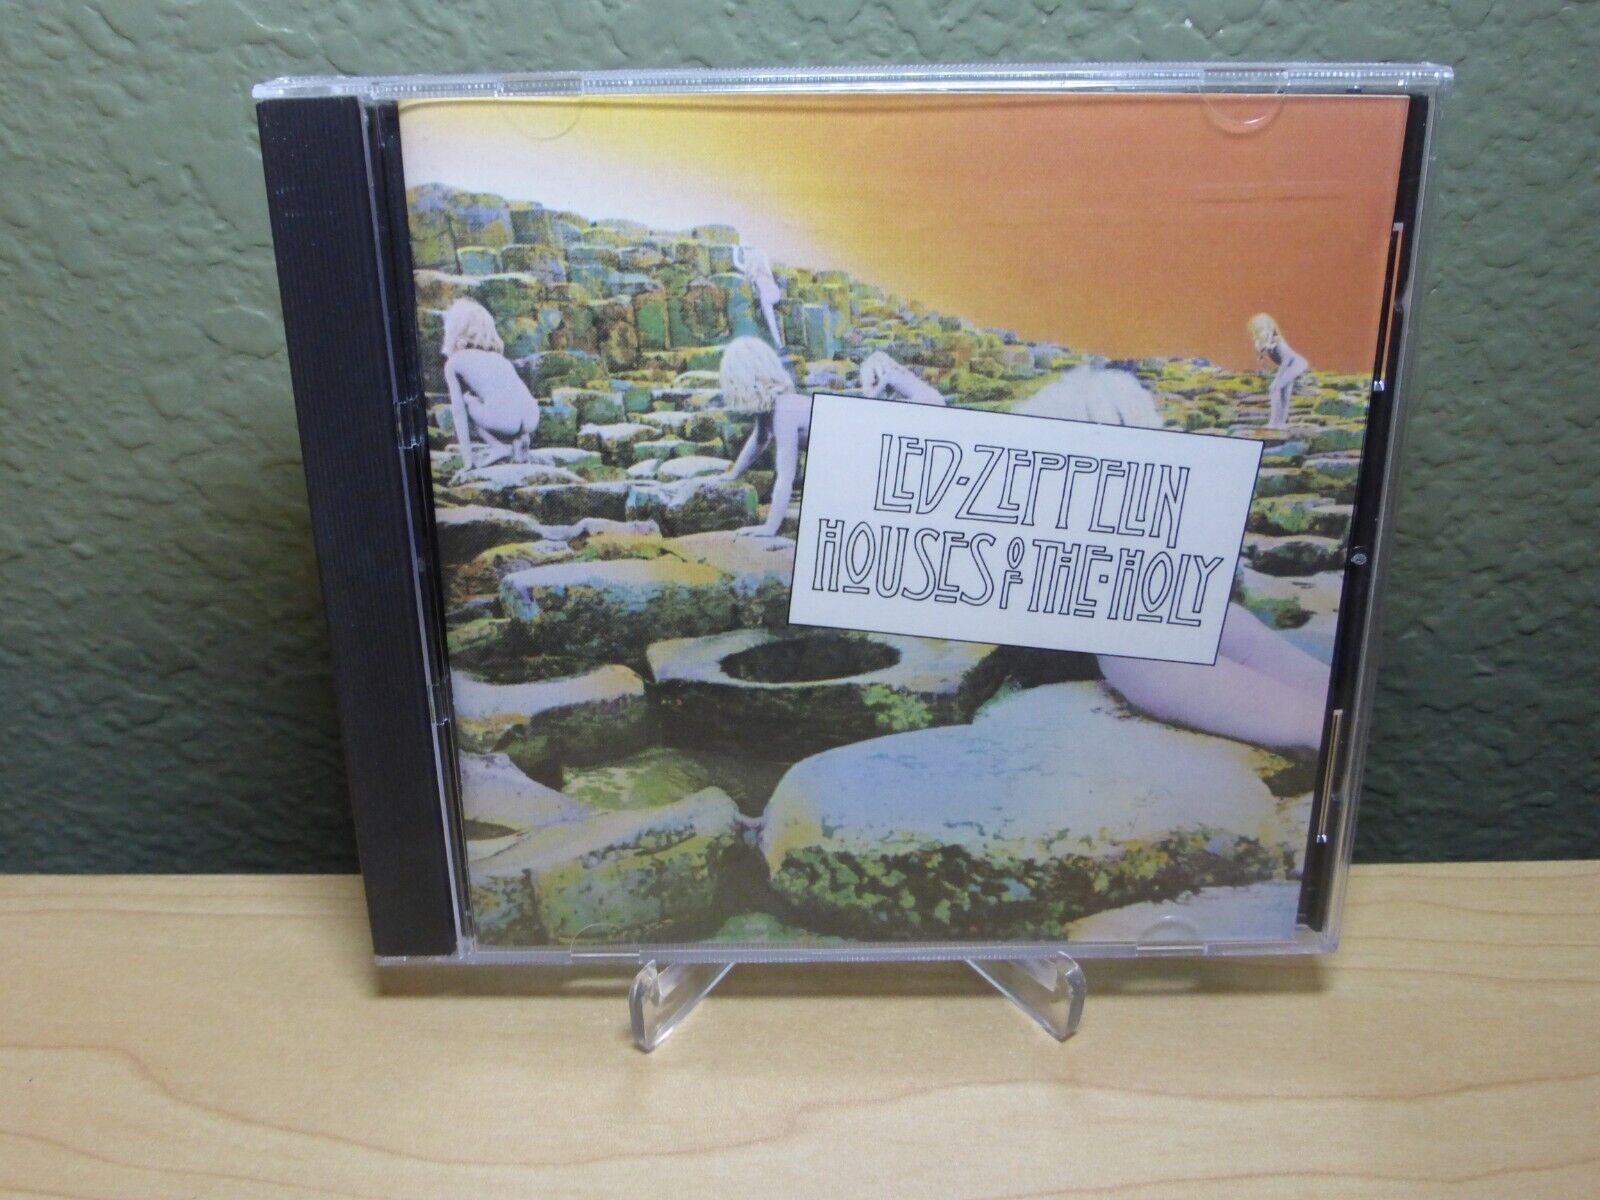 Led Zeppelin House Of The Holy CD Atlantic Records Columbia House Version